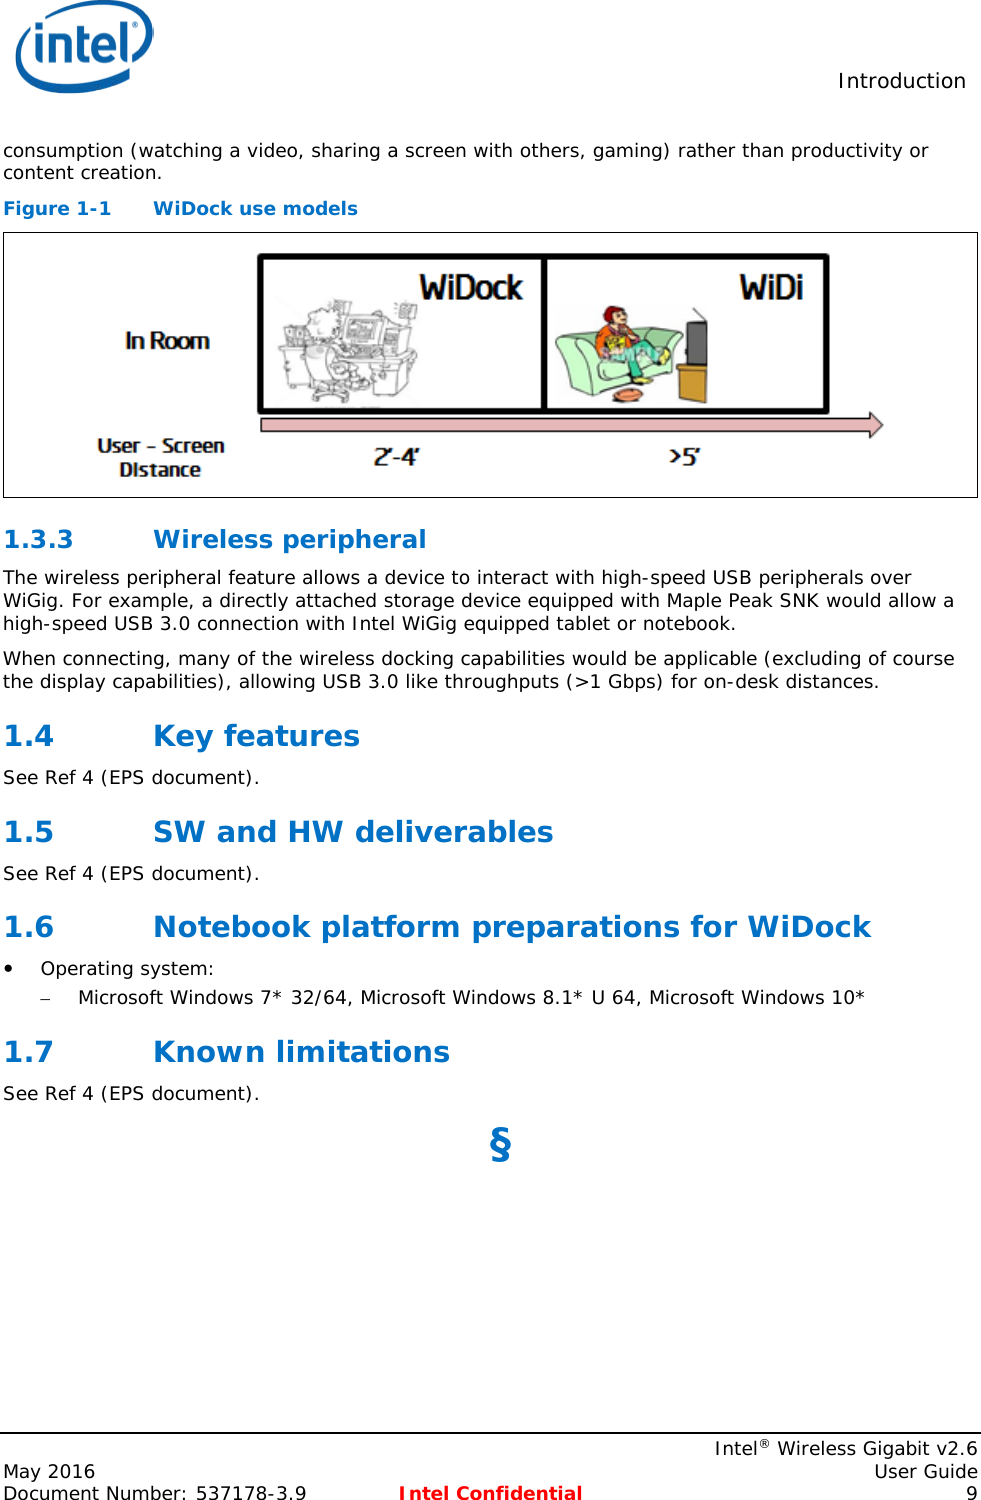  Introduction    Intel® Wireless Gigabit v2.6 May 2016    User Guide Document Number: 537178-3.9 Intel Confidential  9 consumption (watching a video, sharing a screen with others, gaming) rather than productivity or content creation. Figure 1-1  WiDock use models  1.3.3 Wireless peripheral The wireless peripheral feature allows a device to interact with high-speed USB peripherals over WiGig. For example, a directly attached storage device equipped with Maple Peak SNK would allow a high-speed USB 3.0 connection with Intel WiGig equipped tablet or notebook. When connecting, many of the wireless docking capabilities would be applicable (excluding of course the display capabilities), allowing USB 3.0 like throughputs (&gt;1 Gbps) for on-desk distances. 1.4 Key features See Ref 4 (EPS document). 1.5 SW and HW deliverables See Ref 4 (EPS document). 1.6 Notebook platform preparations for WiDock  Operating system: – Microsoft Windows 7* 32/64, Microsoft Windows 8.1* U 64, Microsoft Windows 10*  1.7 Known limitations See Ref 4 (EPS document). §  